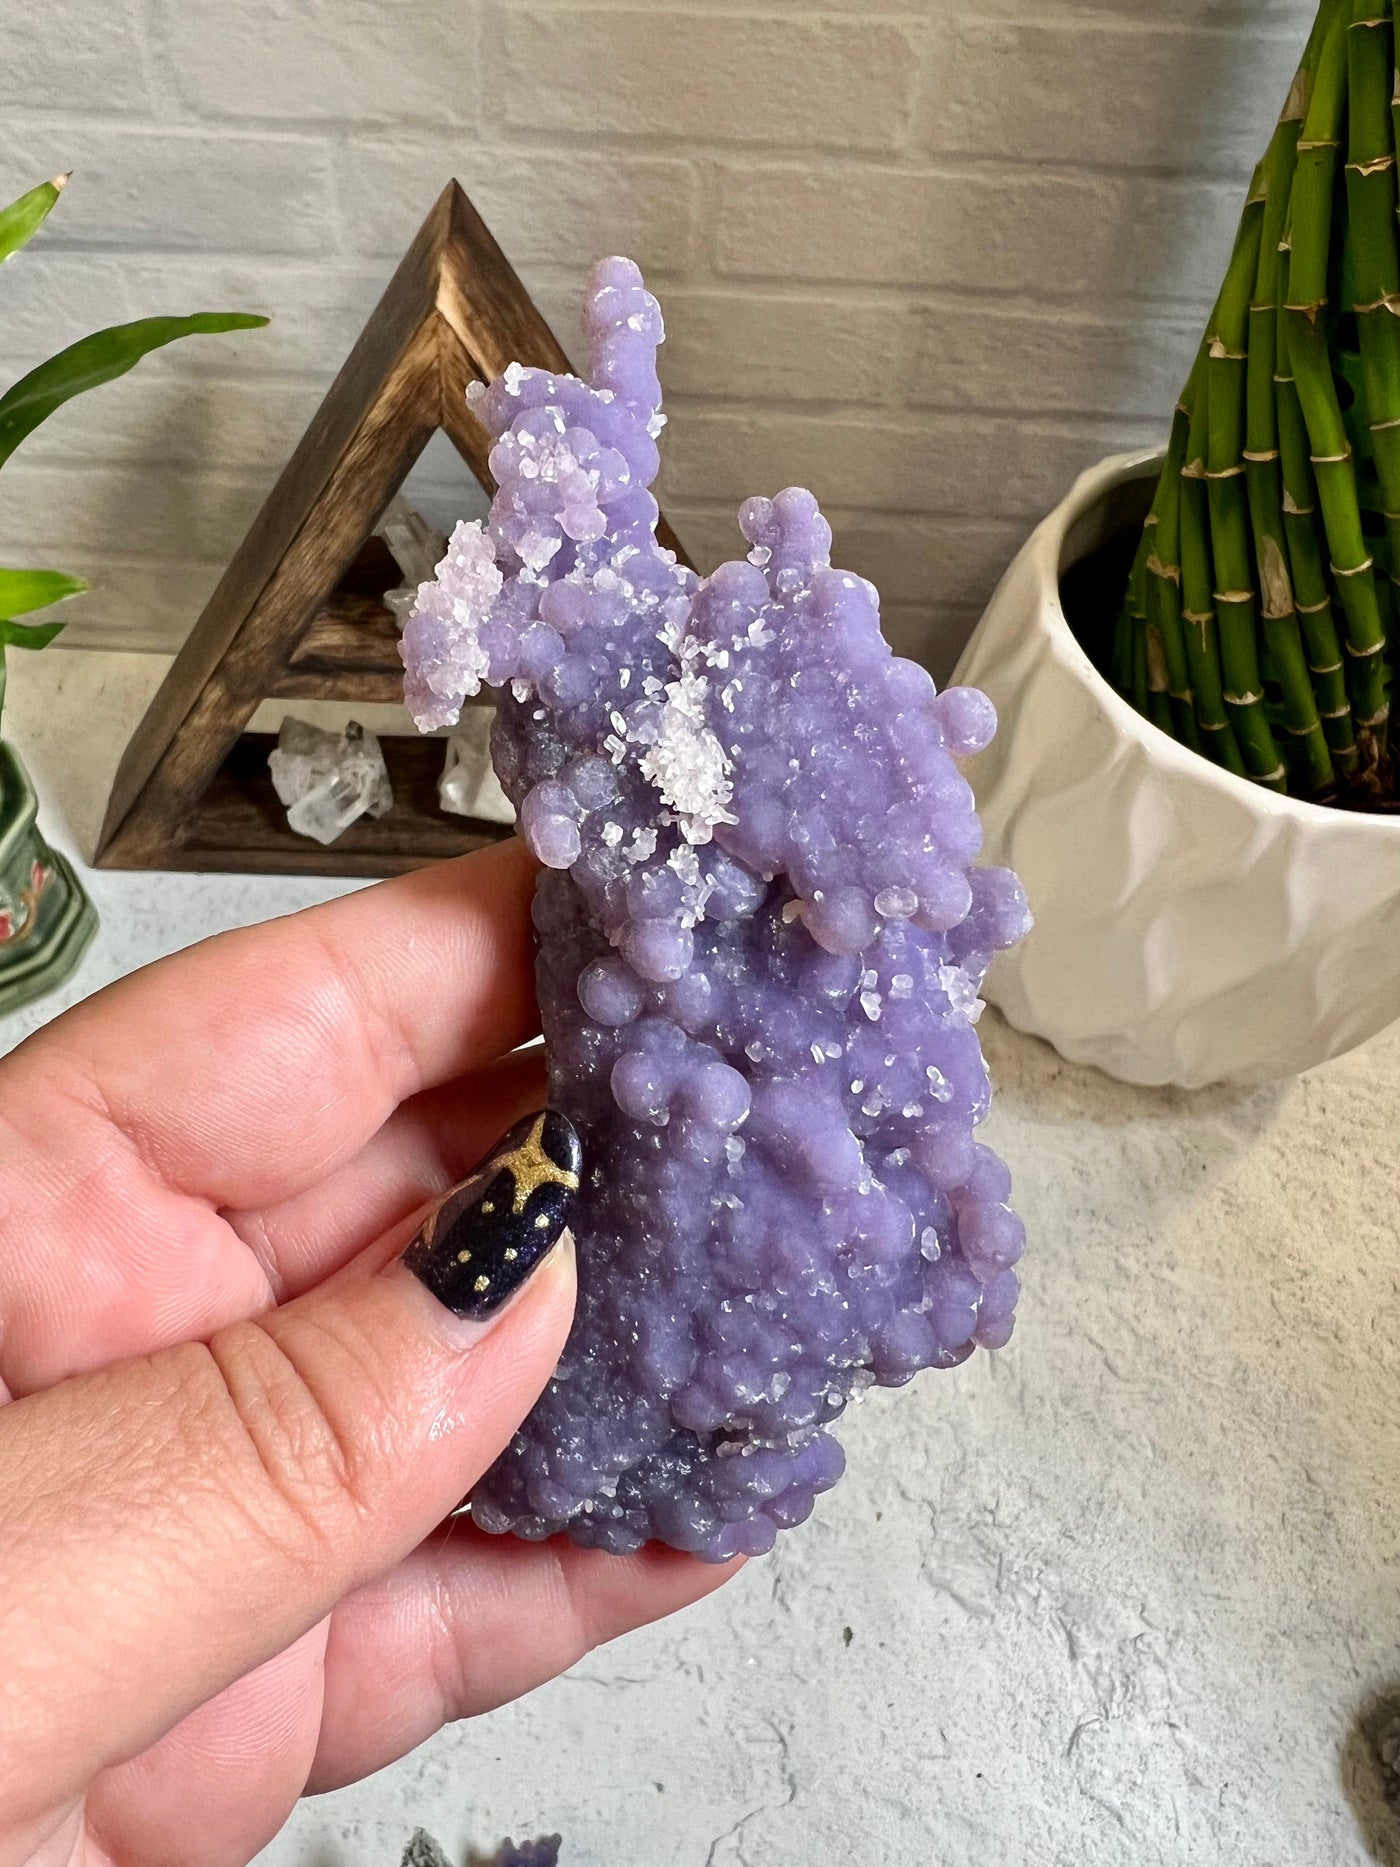 Grape agate formation in a woman's hand.